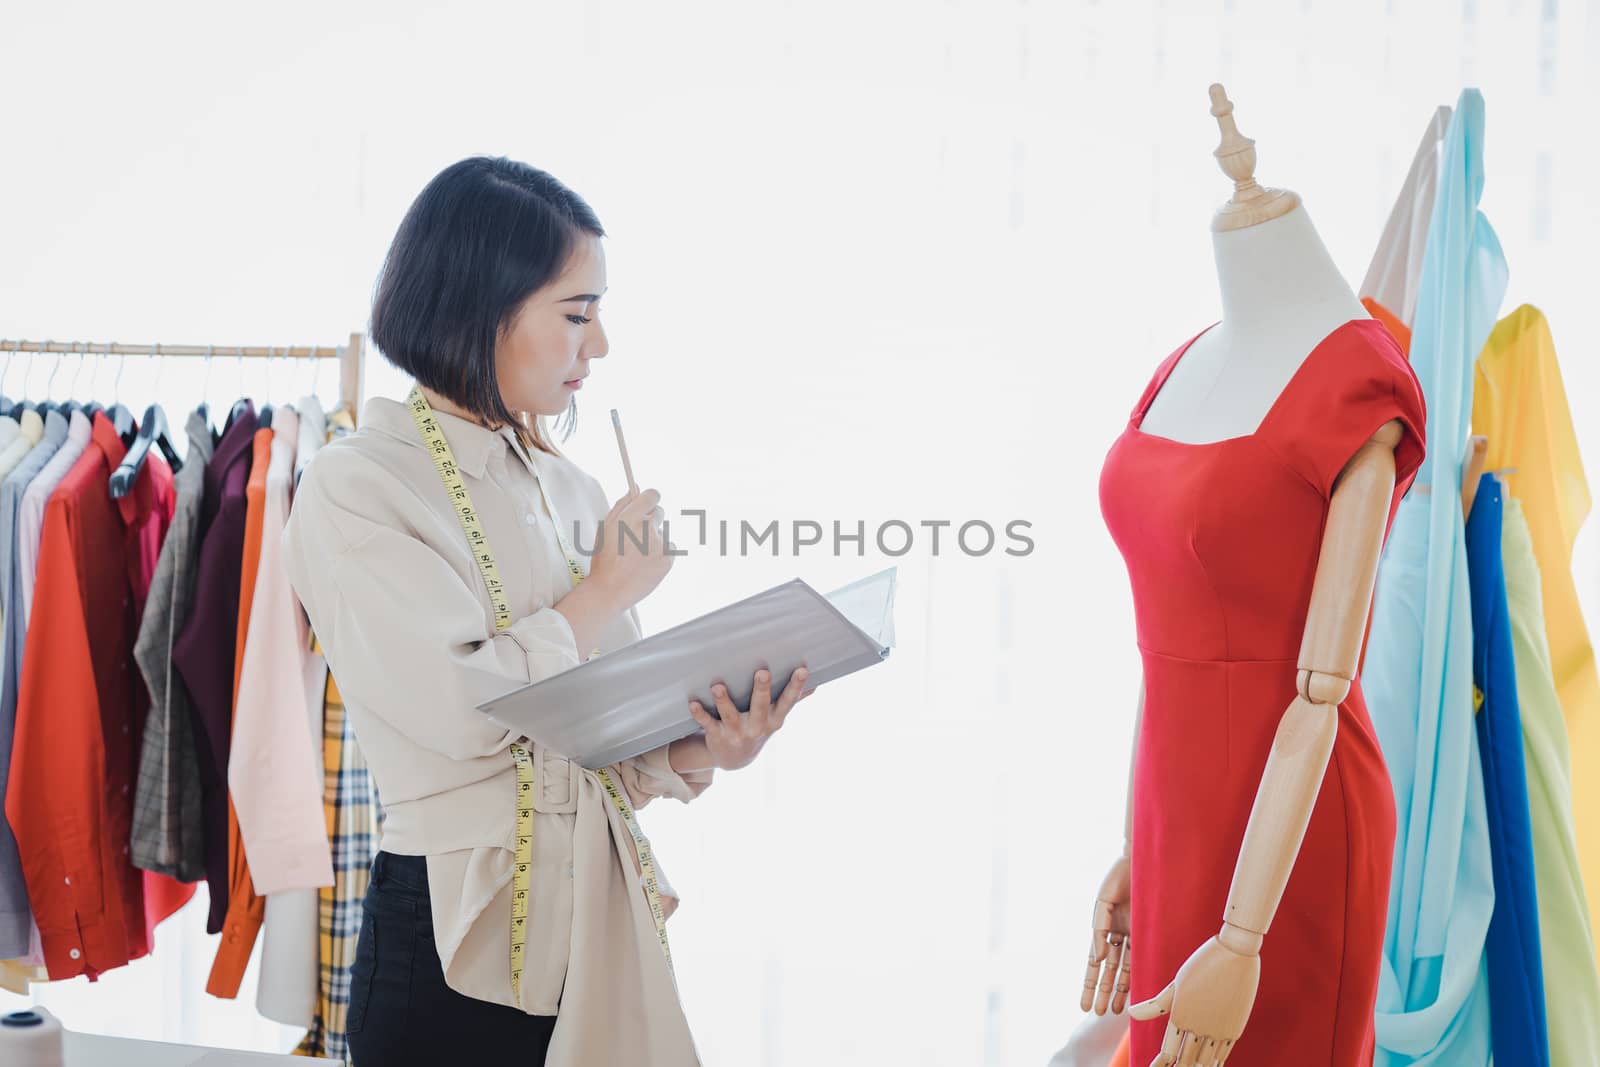 Professional fashion designers are checking new clothes that have been cut and delivered to customers.